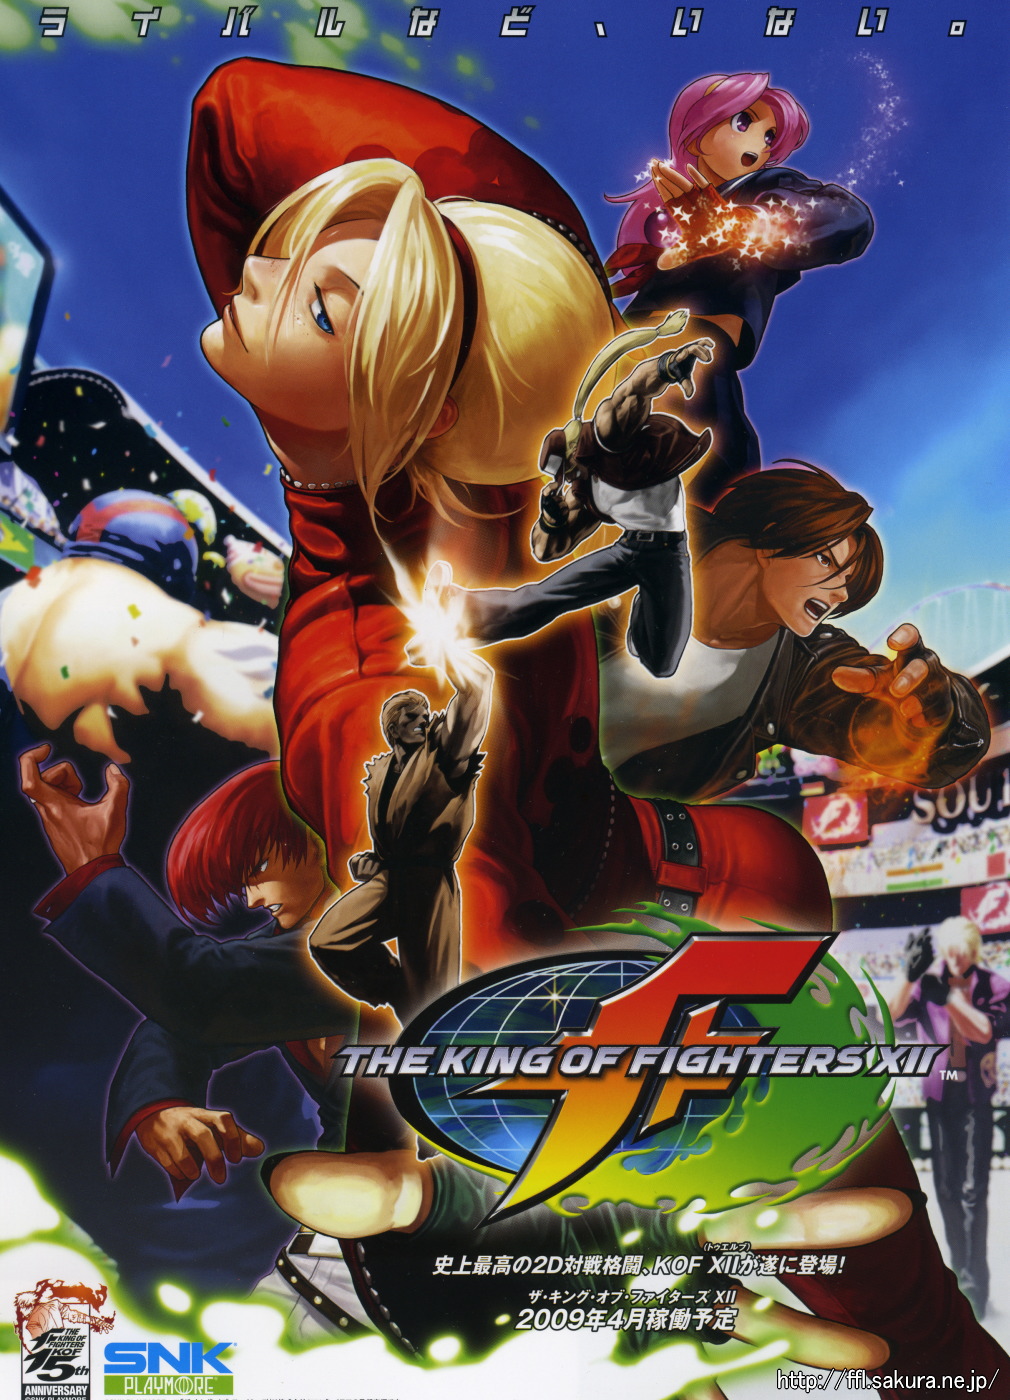 The King of Fighters XII | SNK Wiki | Fandom